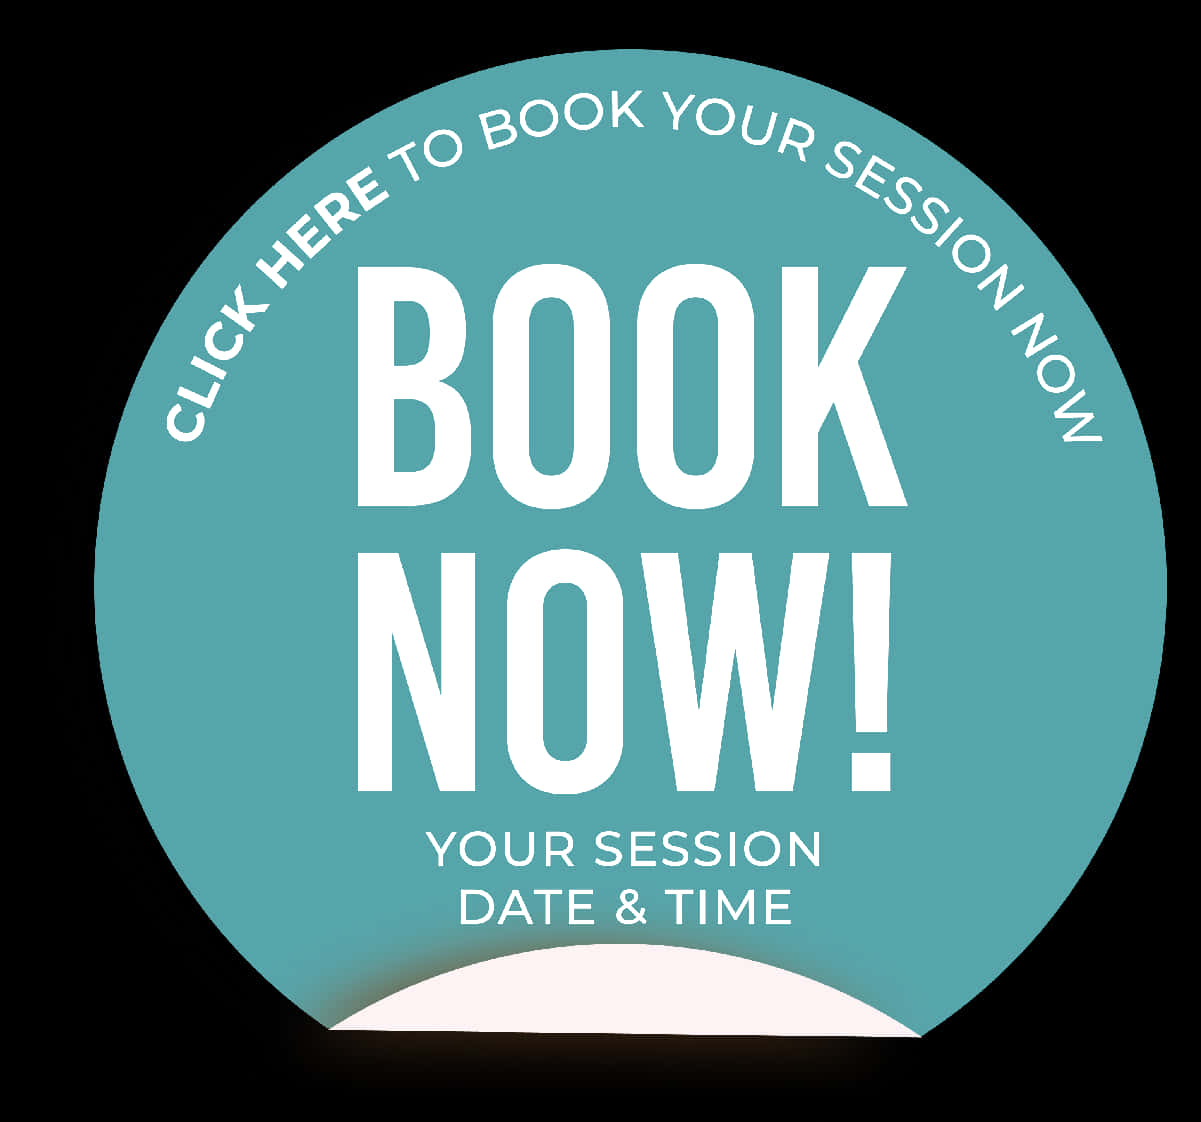 Book Now Button Graphic PNG image